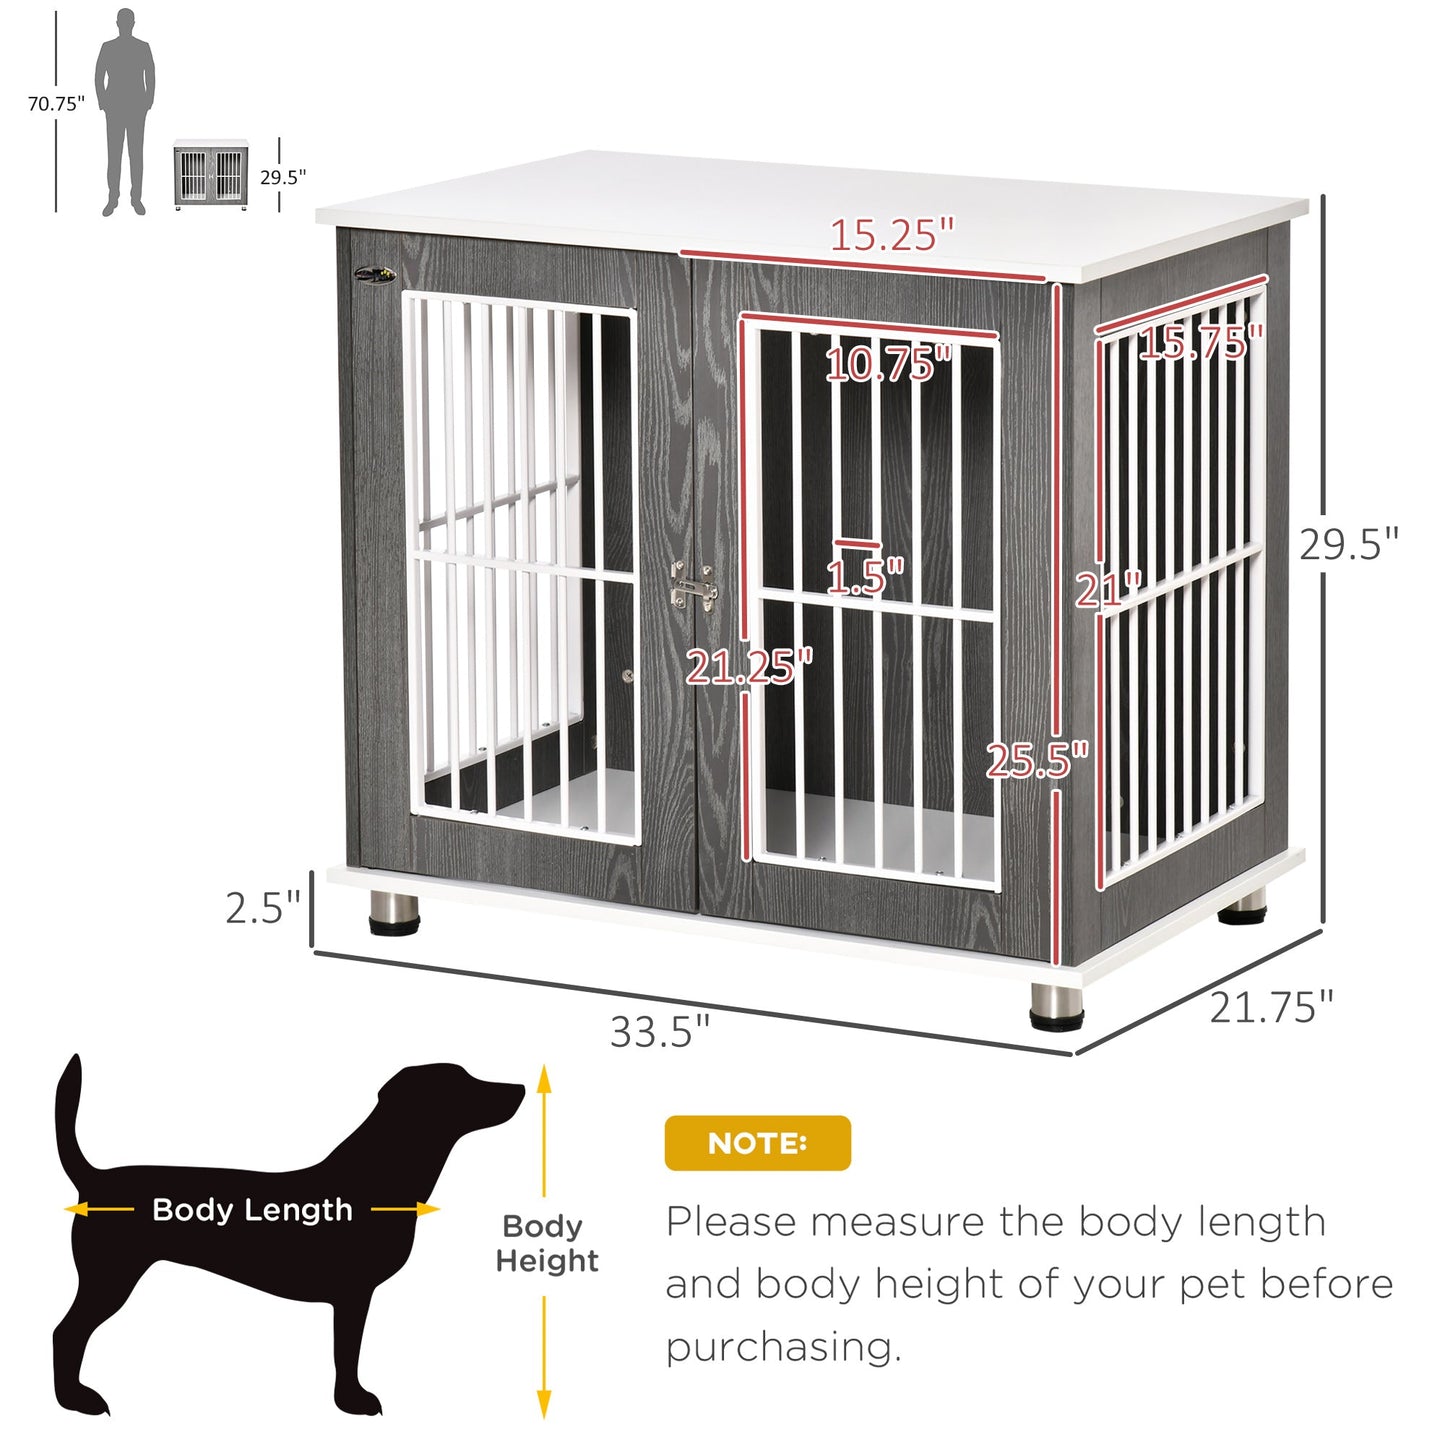 Pet Supplies-34'' Wooden Dog Crate, Modern Wire Dog Crate, Dog Kennel with Door, Lock & Adjustable Foot Pads, for Small and Medium Dogs, Gray and White - Outdoor Style Company